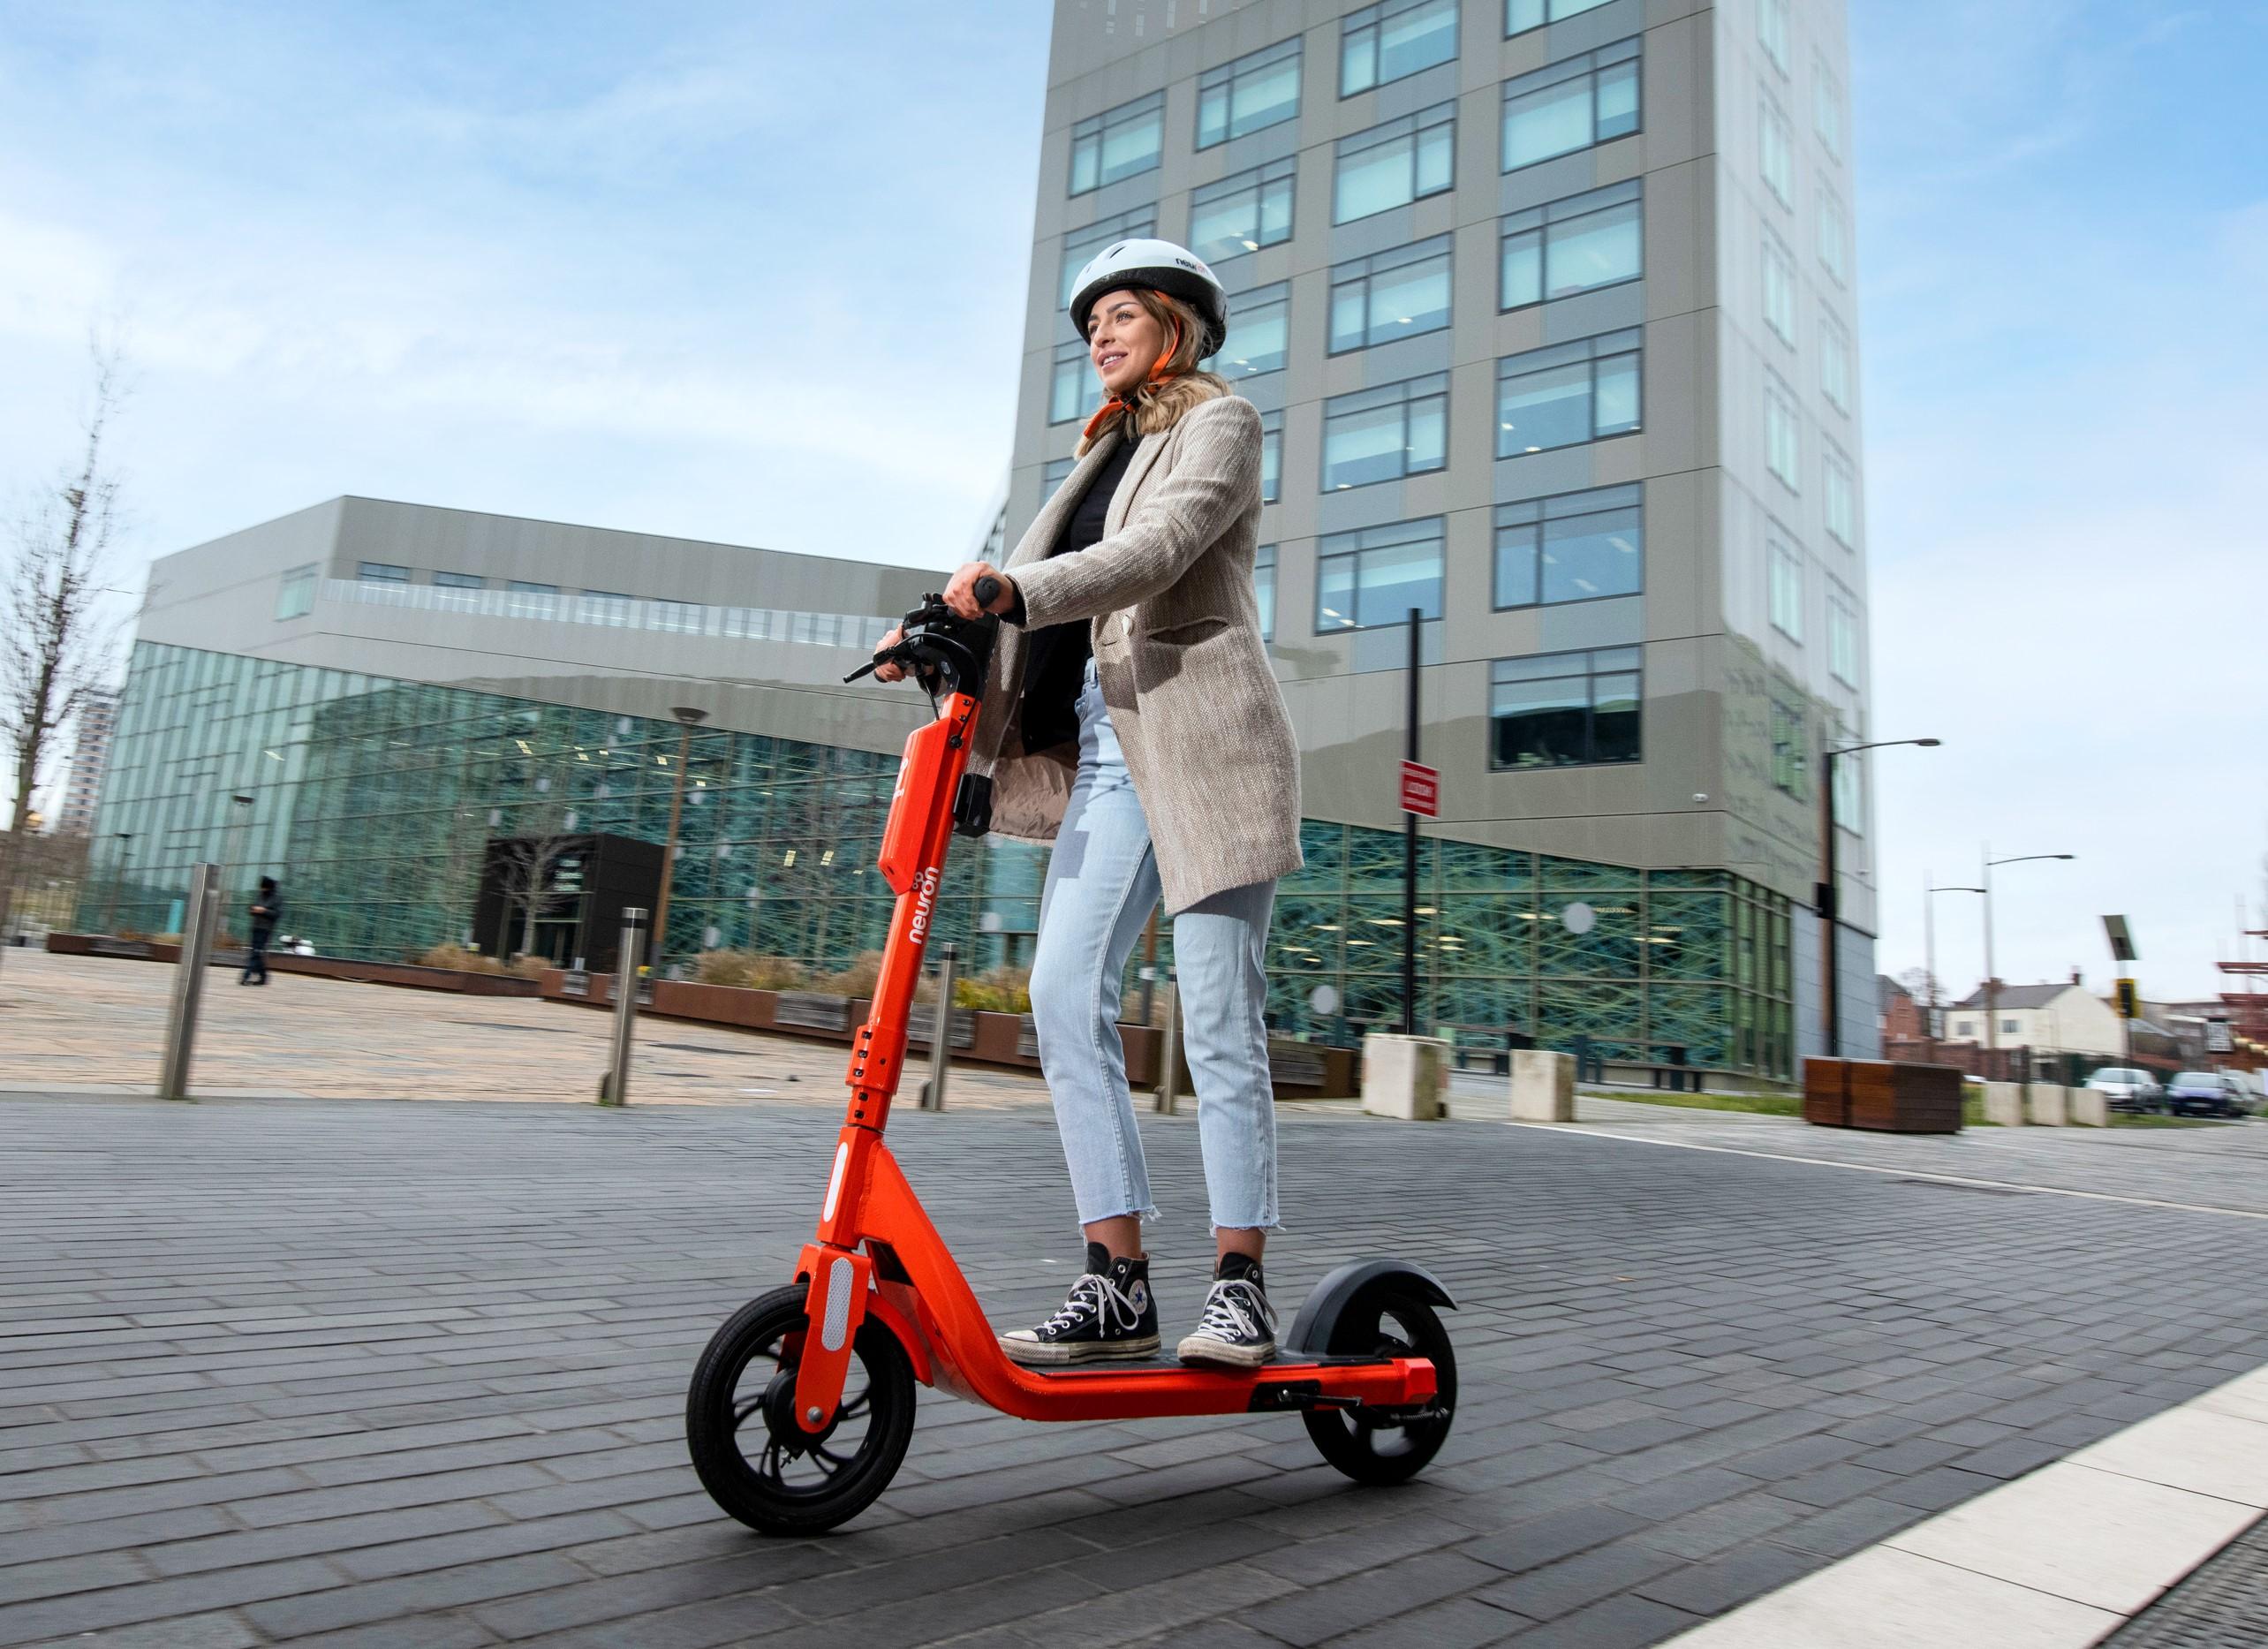 Photos shows a young woman riding an orange e-scooter with a tall building in the background.